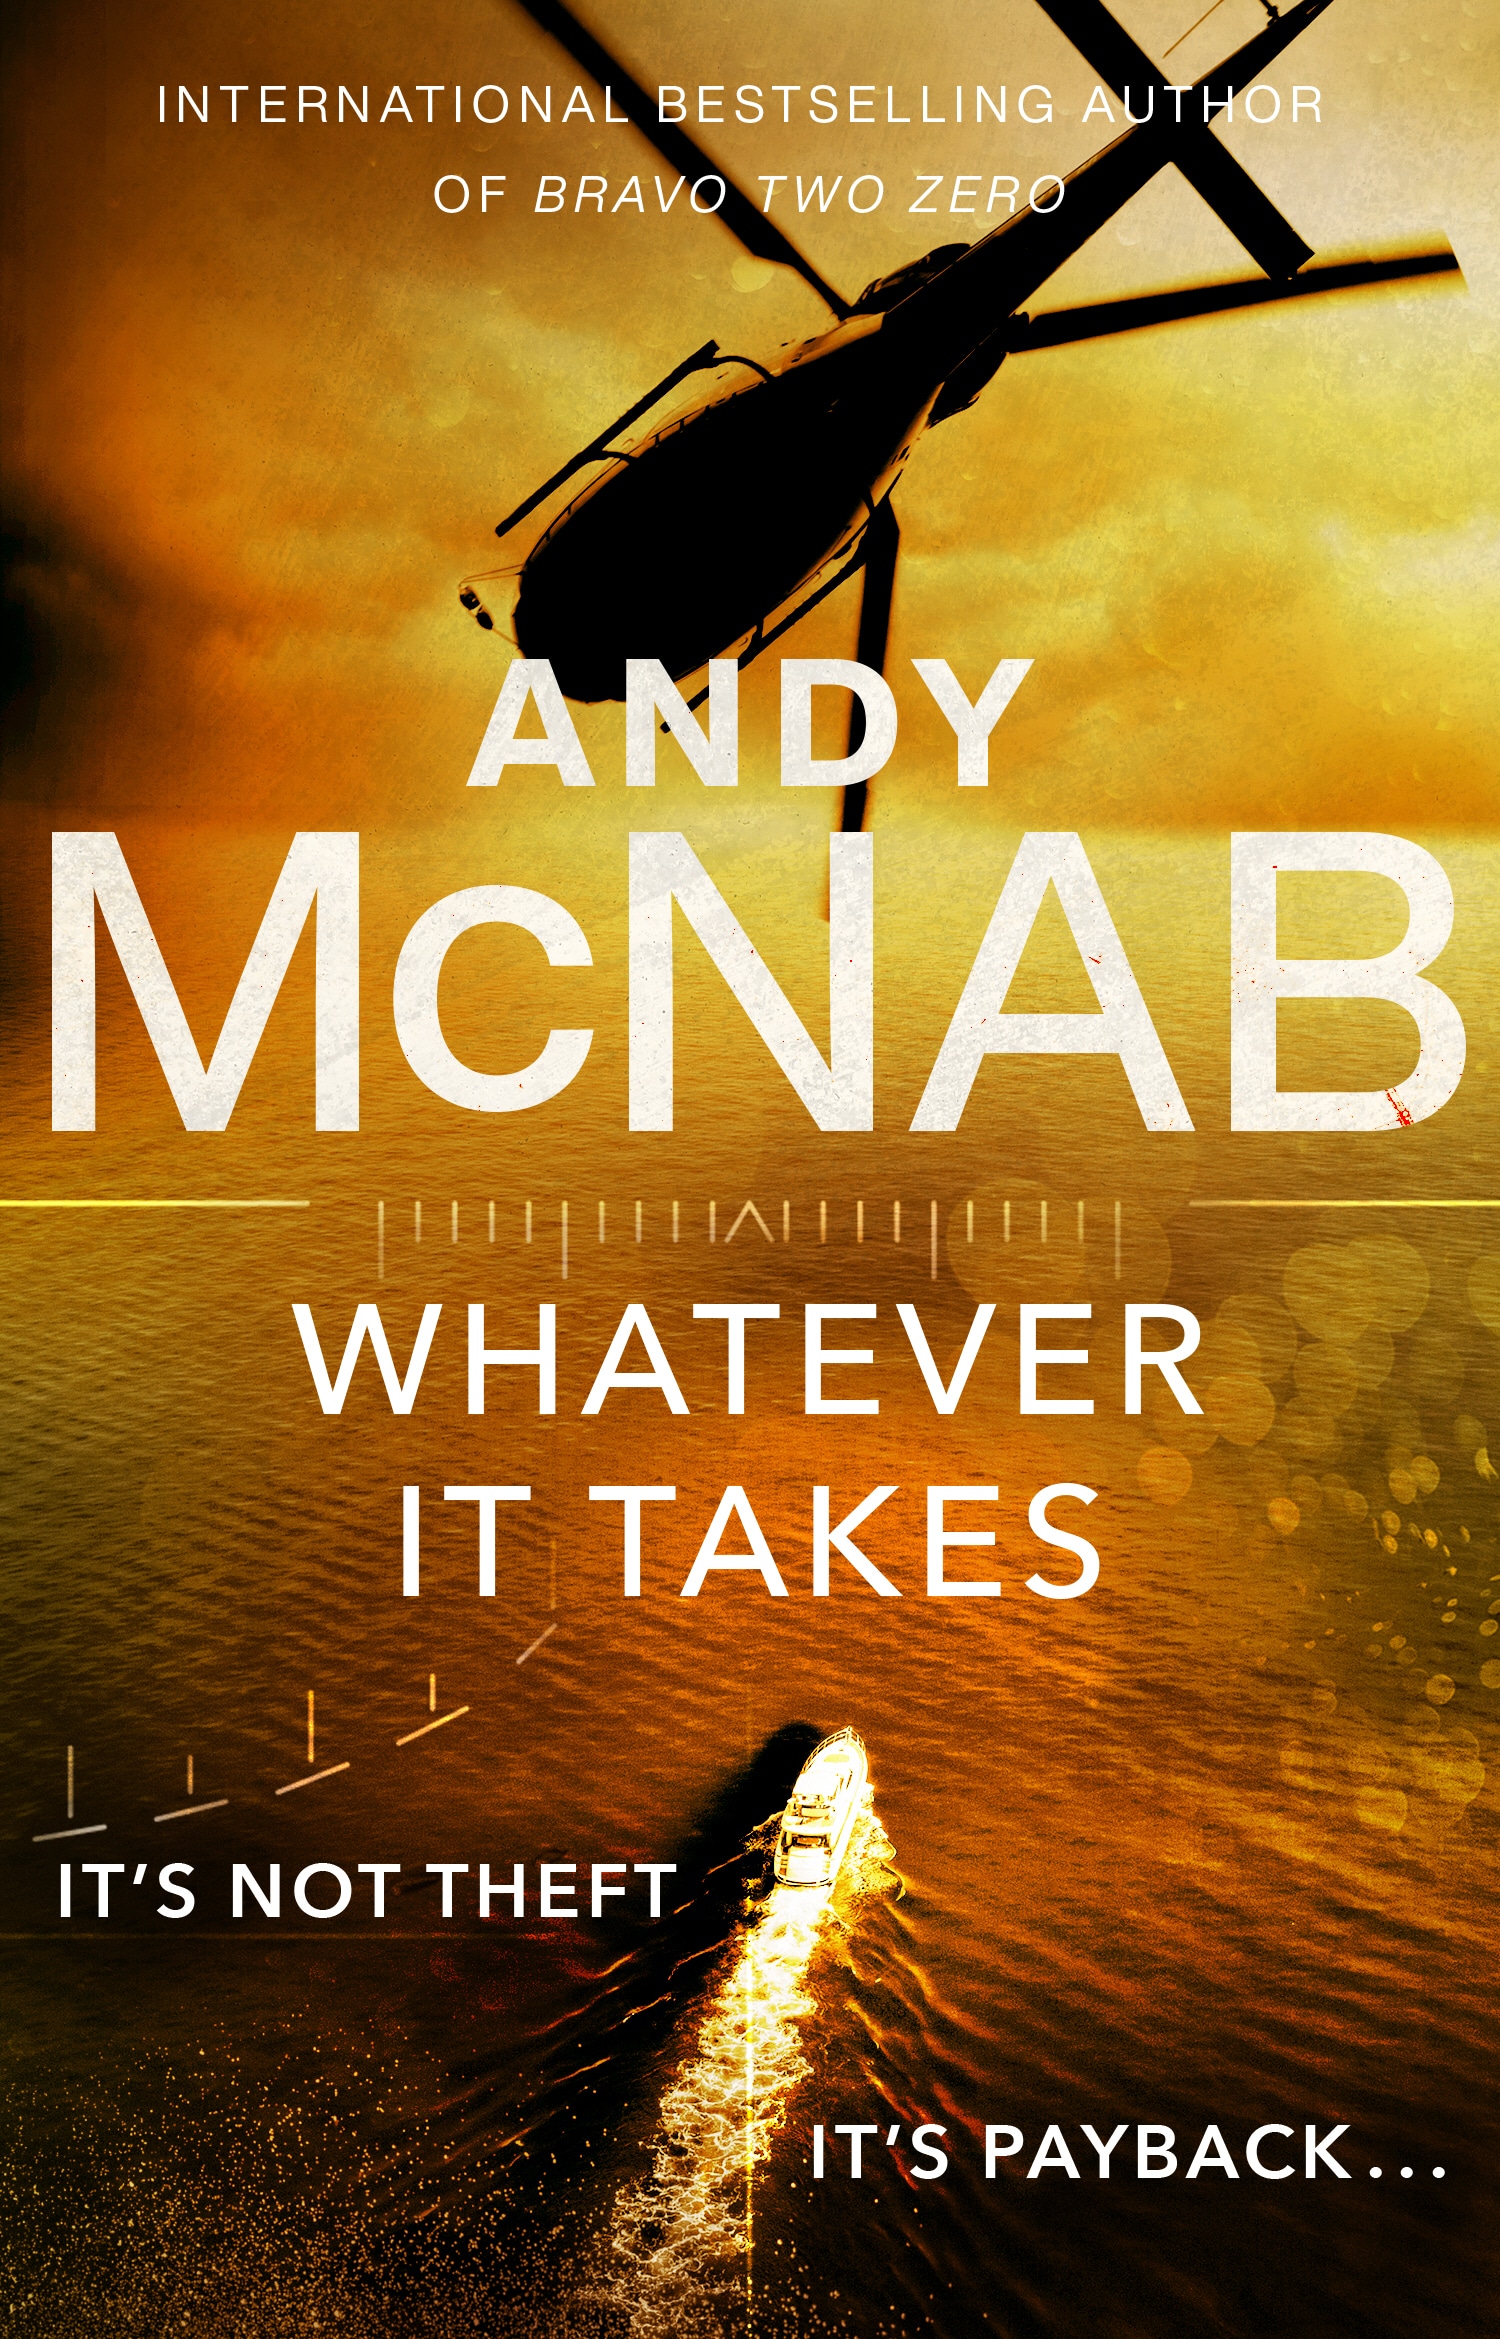 Book “Whatever It Takes” by Andy McNab — October 29, 2020